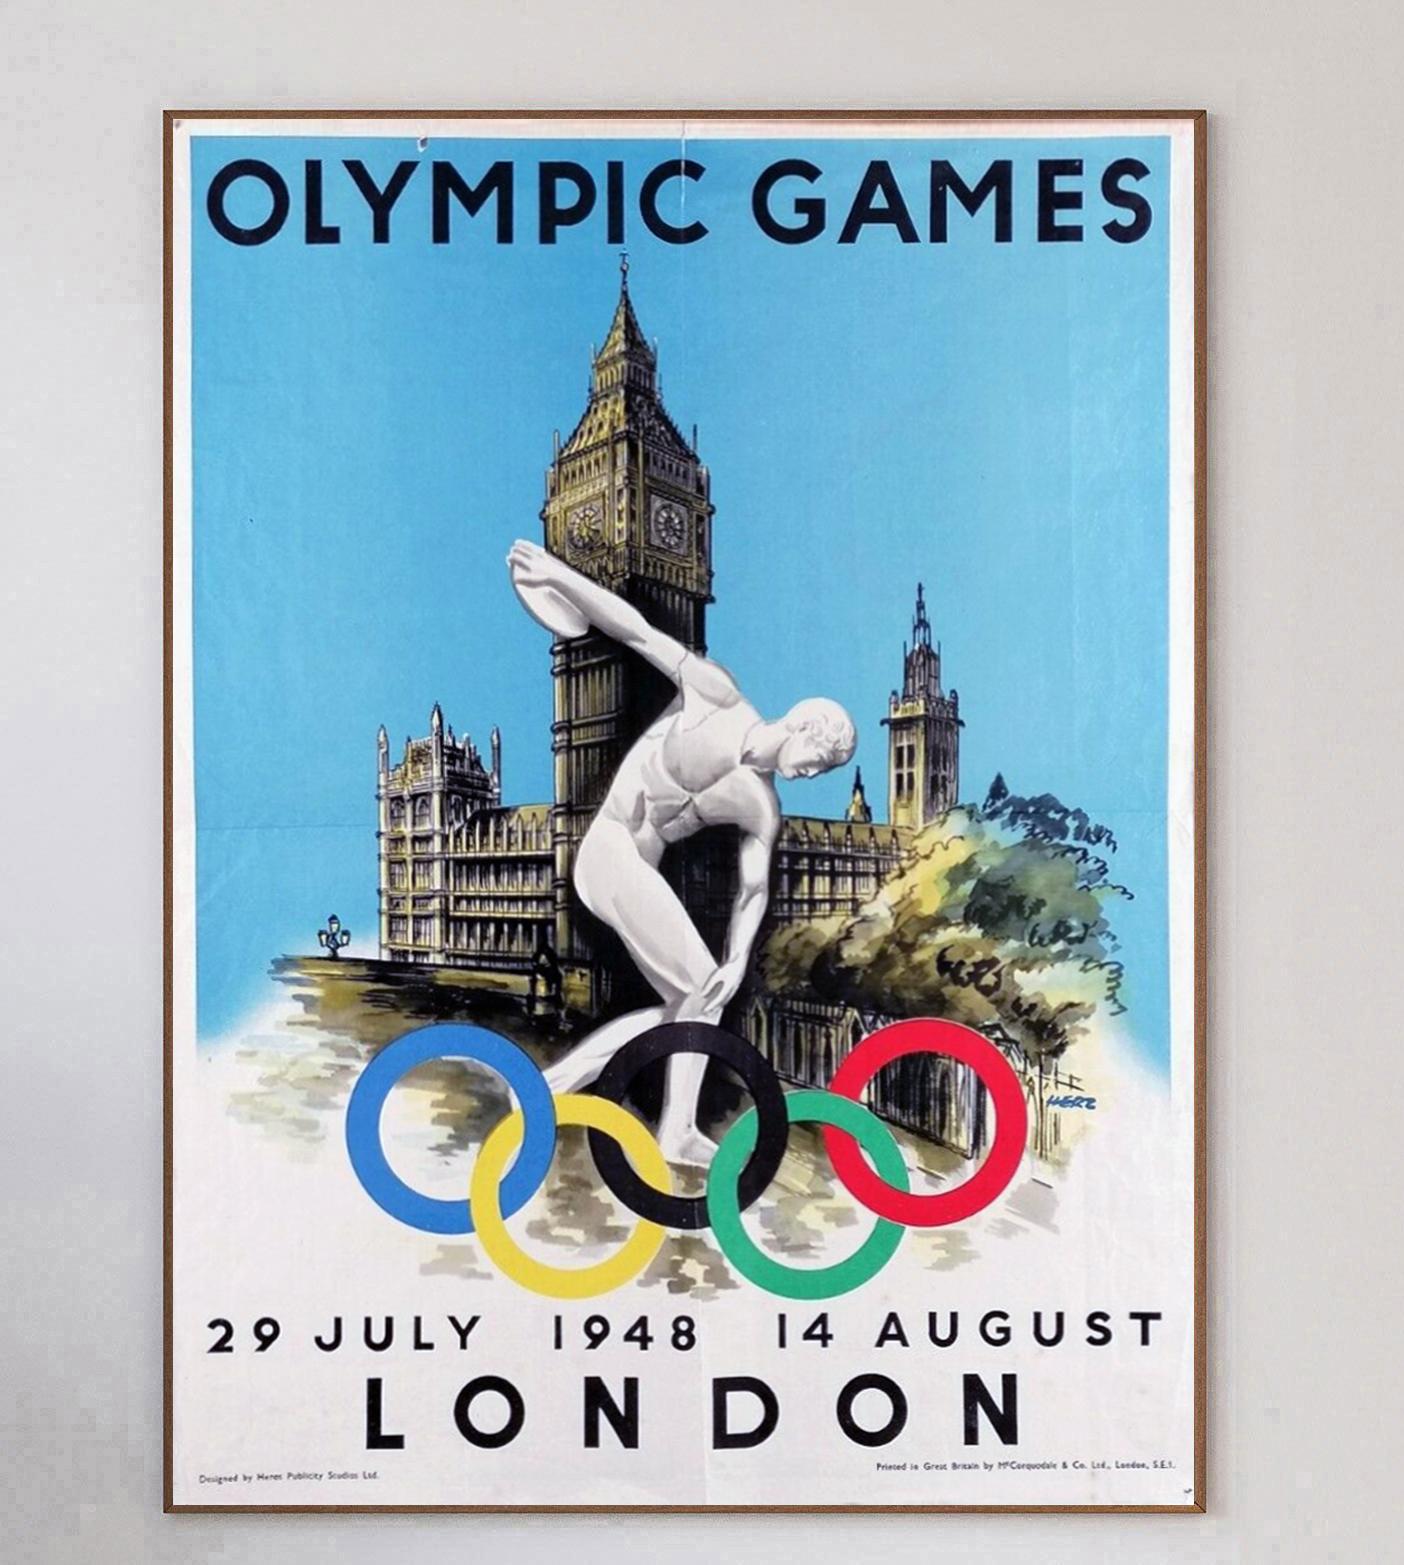 The first games after World War II and Great Britains first time hosting, the 1948 Olympic Games were held in London between 29th July to 14th August. The United States won the games with the most golds. 

This iconic design by Walter Herz depicts